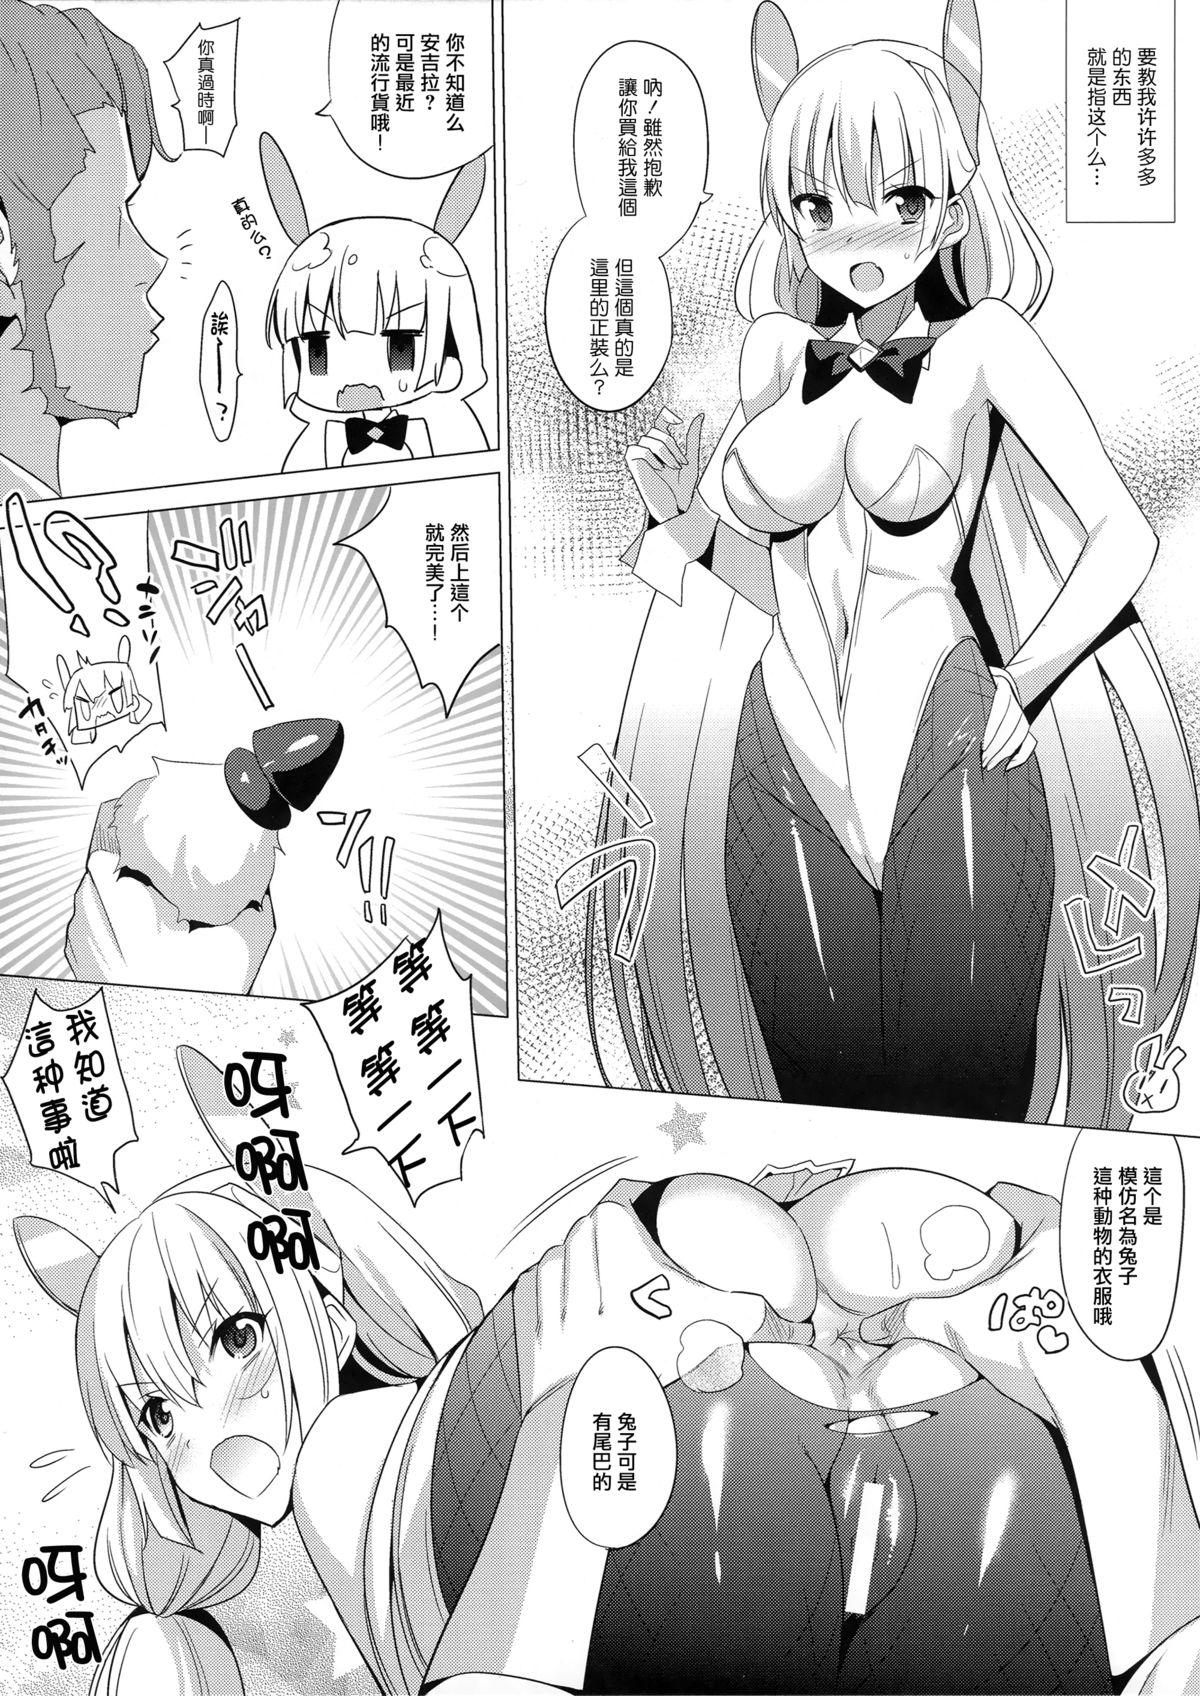 Teen Sex Rakuen e Youkoso 2 First Rabbit - Expelled from paradise Chicks - Page 5